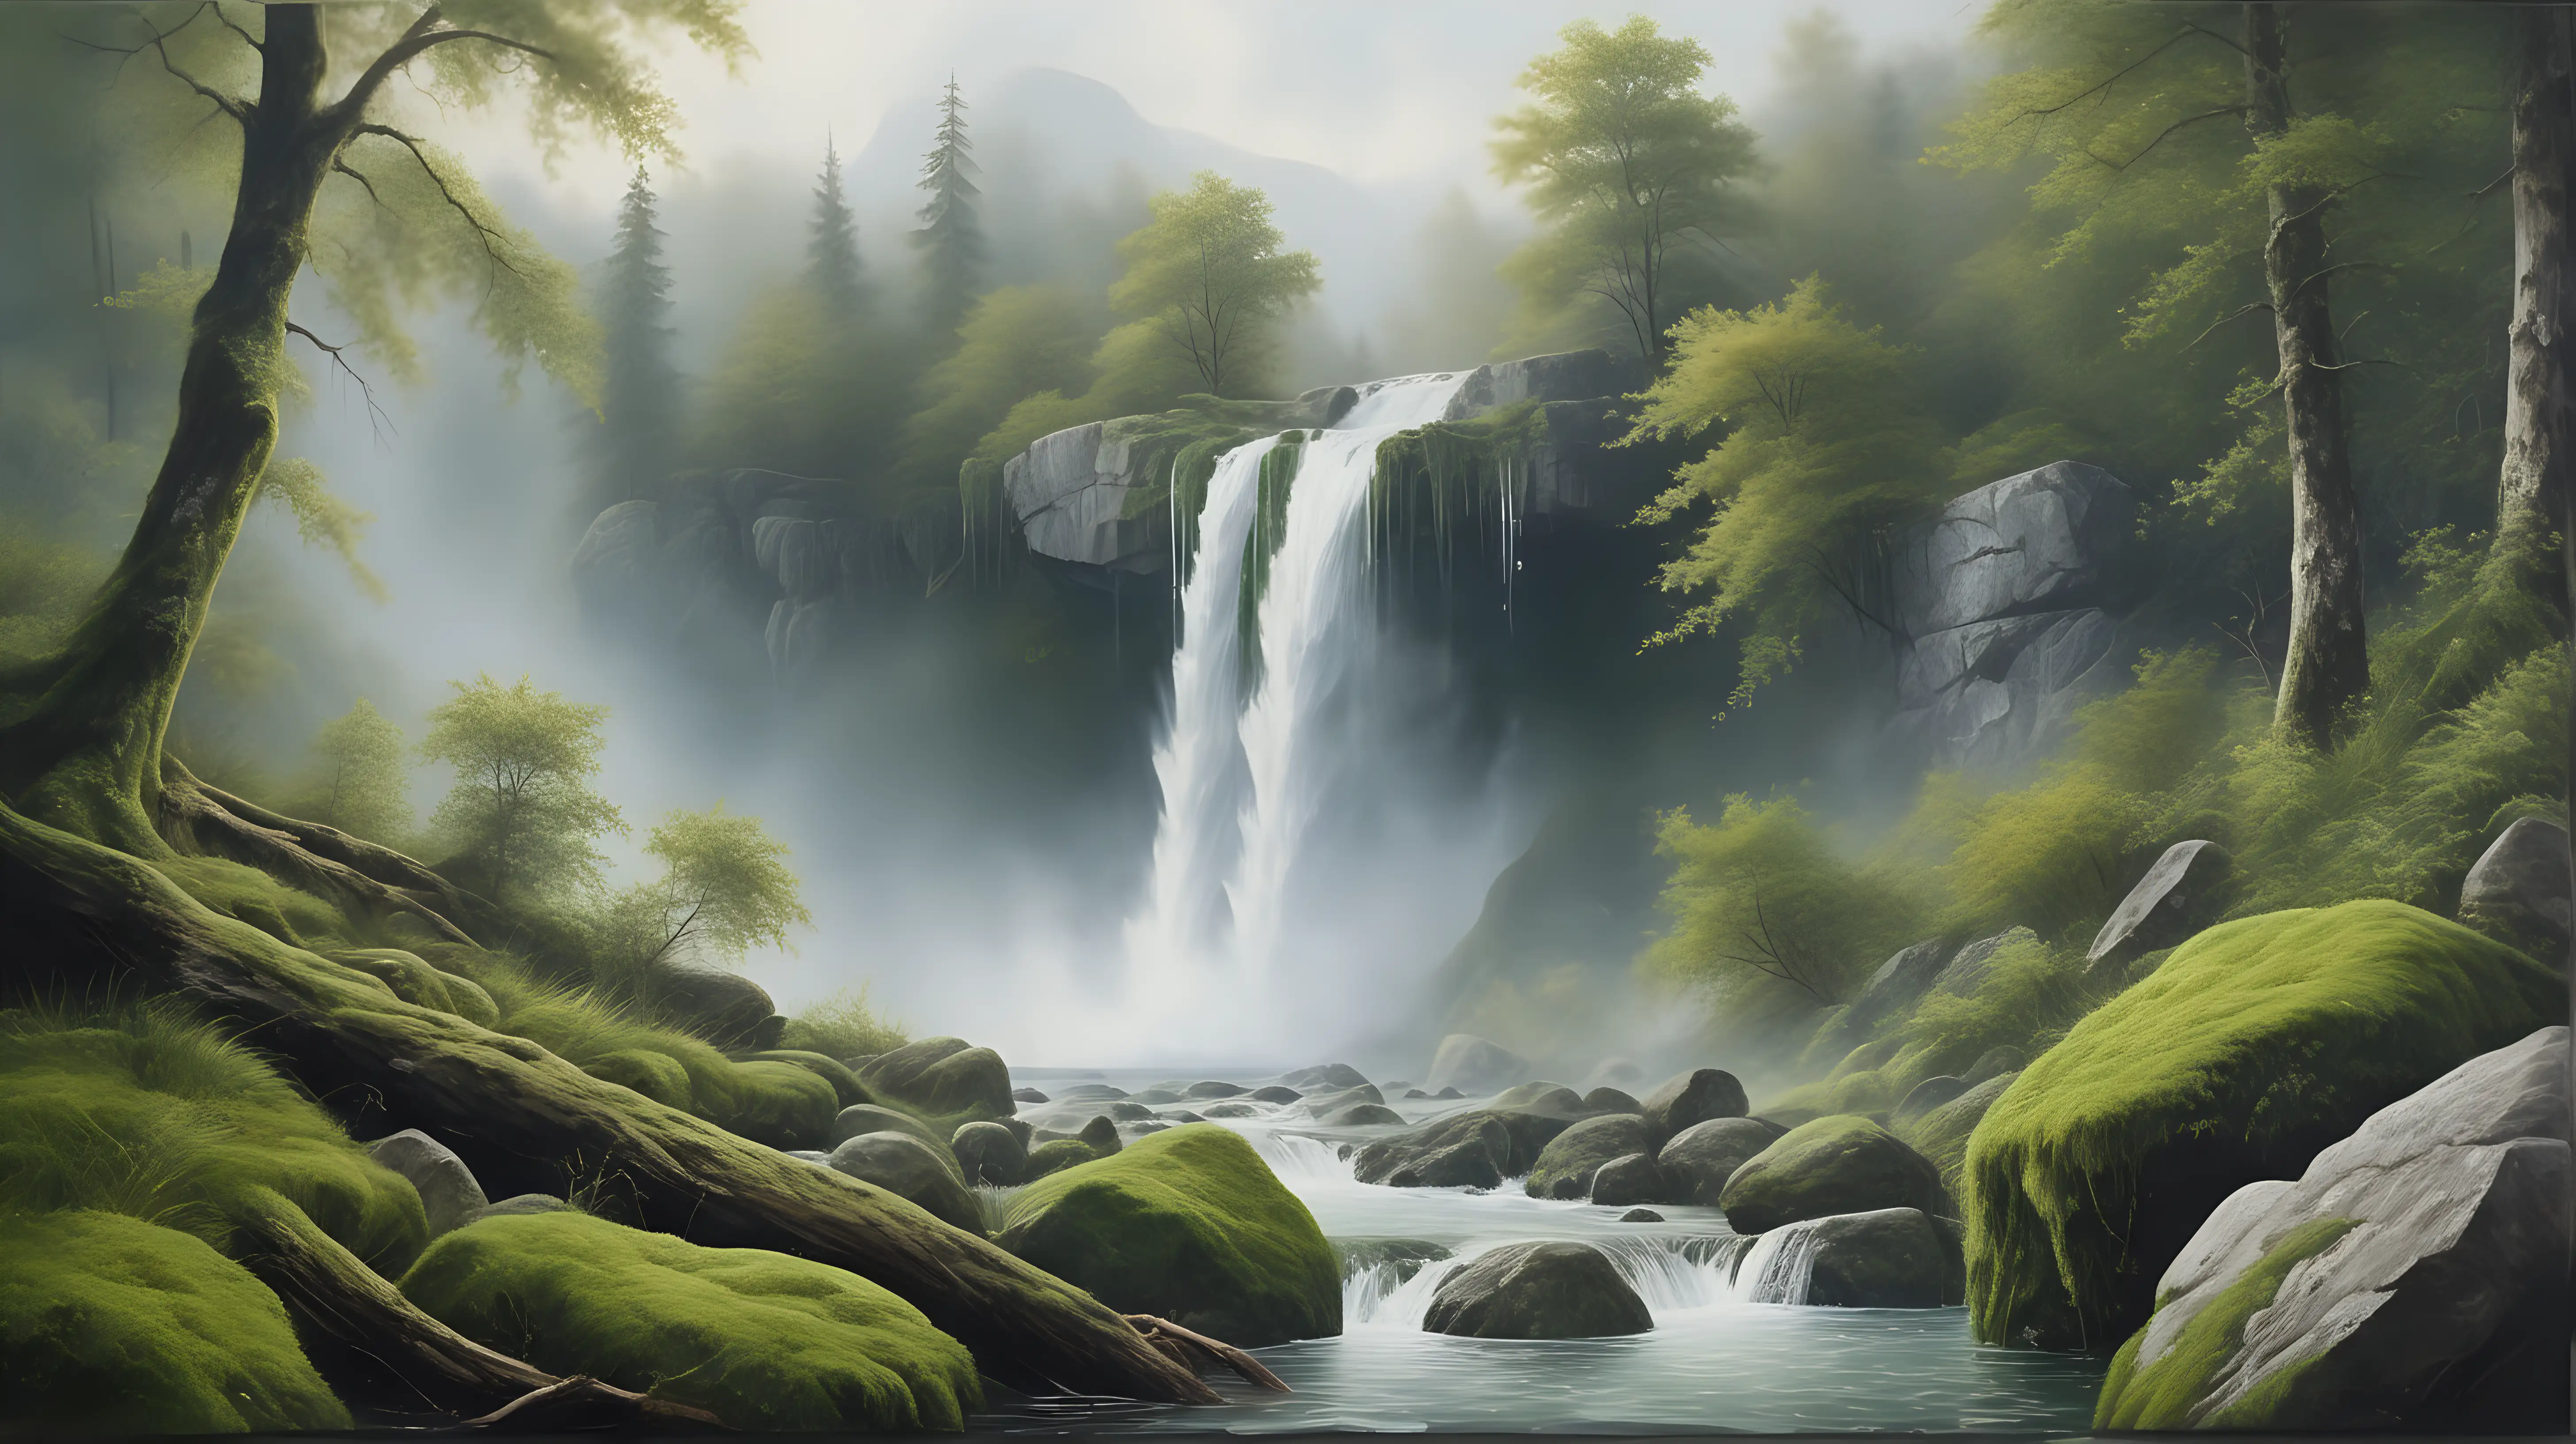 Serene Waterfall Landscape HighResolution Realistic Oil Painting of Nature